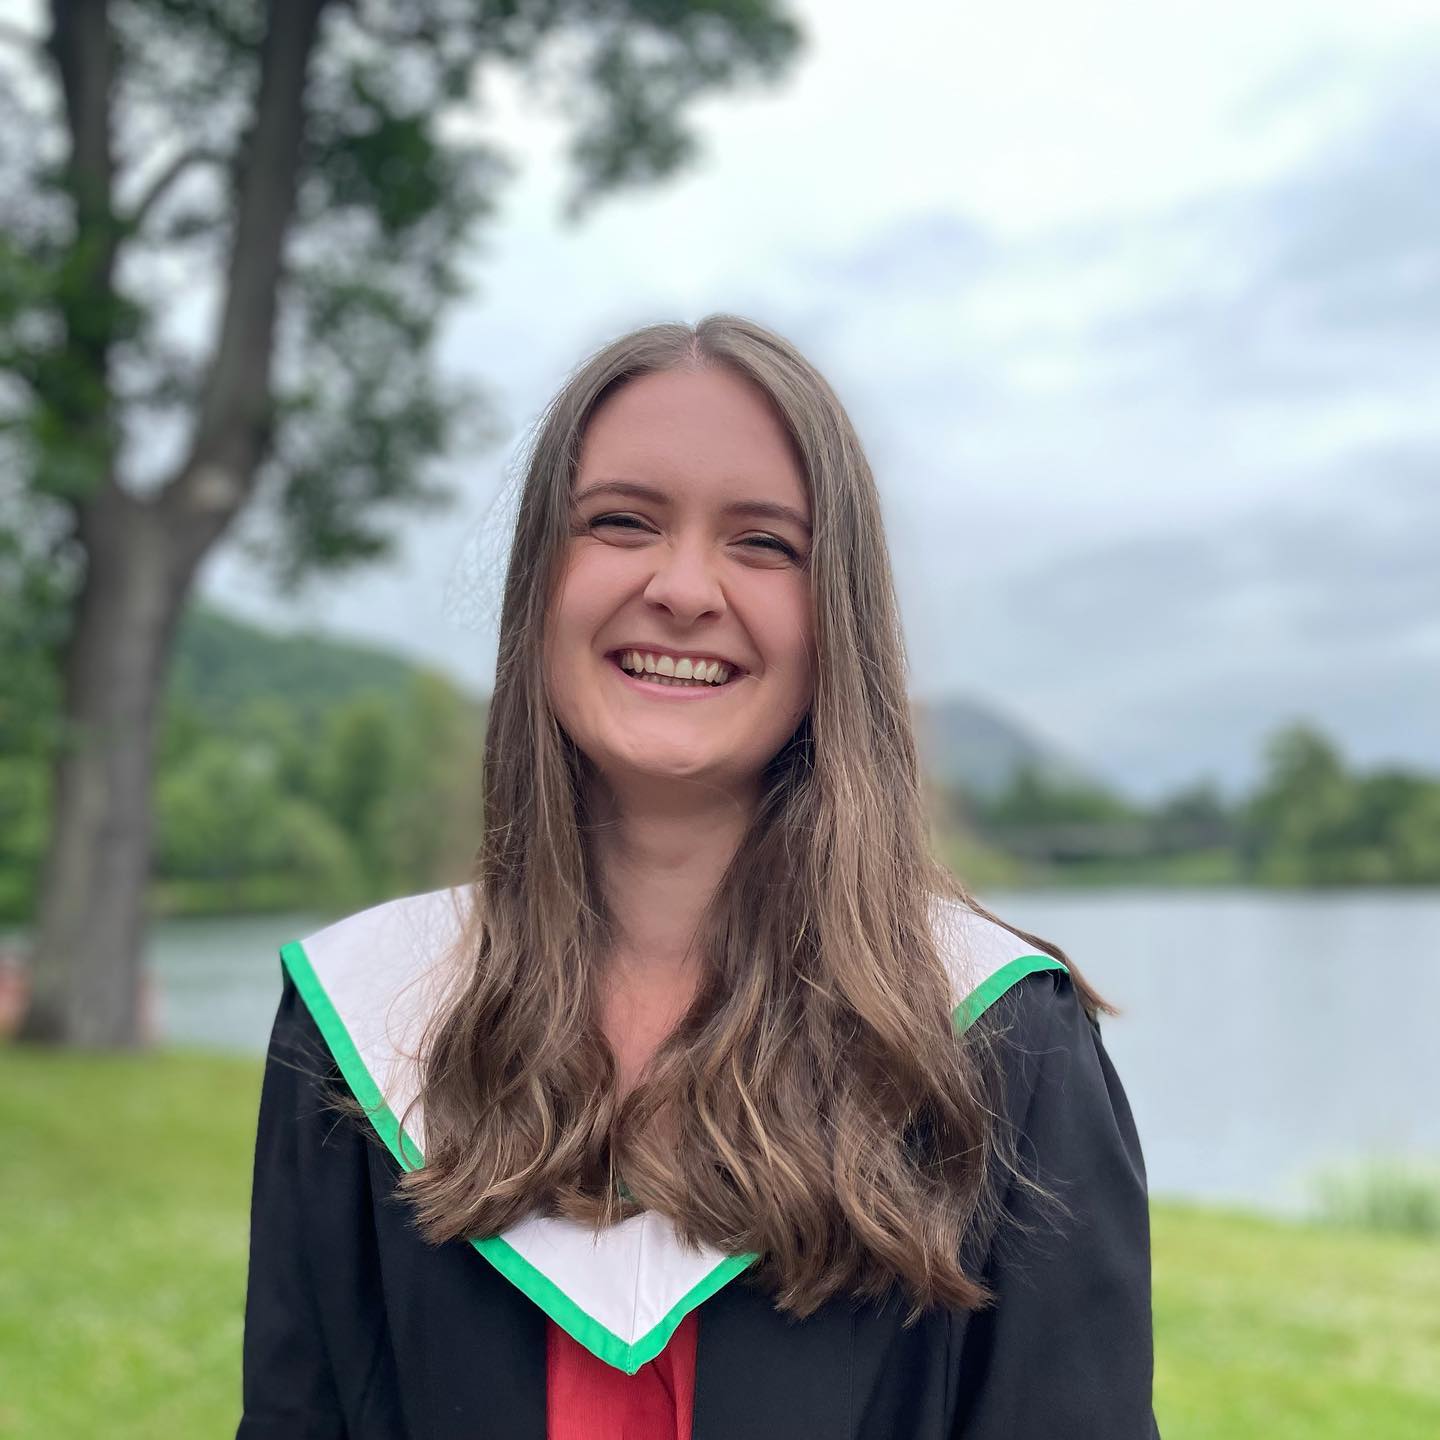 So lovely to celebrate Sarah's success (first class honours psychology degree) over in Stirling this weekend. Proud of her and all she has achieved ️ Many photos were taken! Here are just a few…